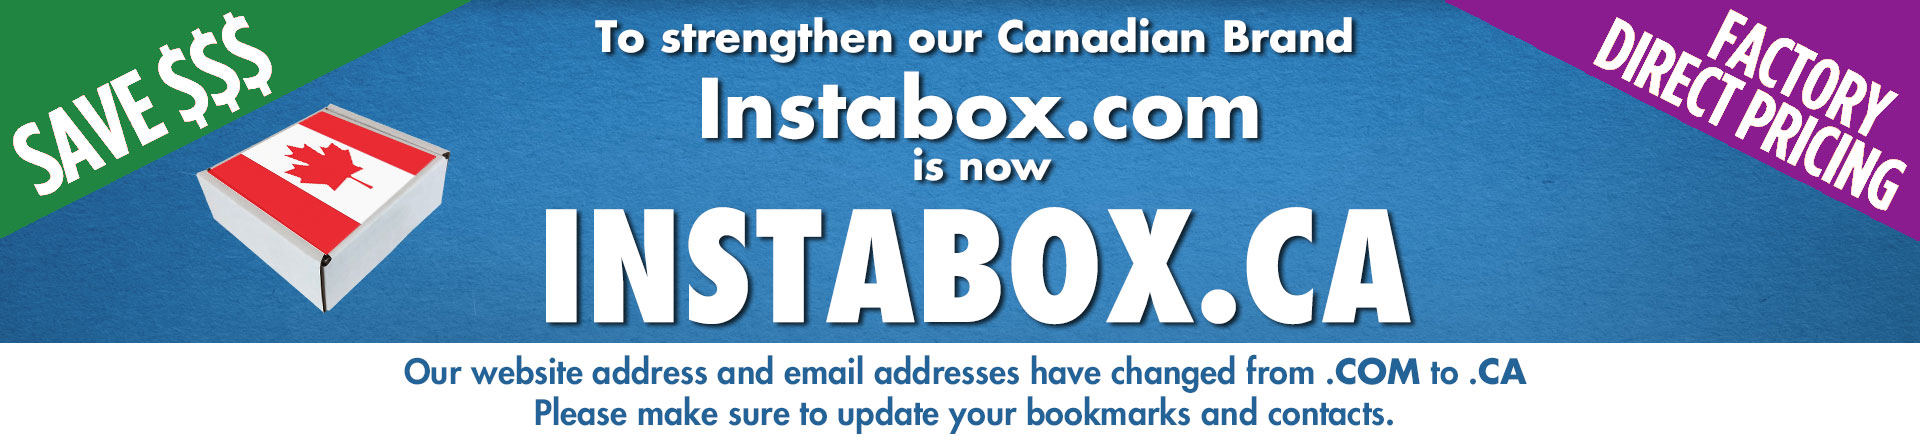 Instabox is now Instabox.ca